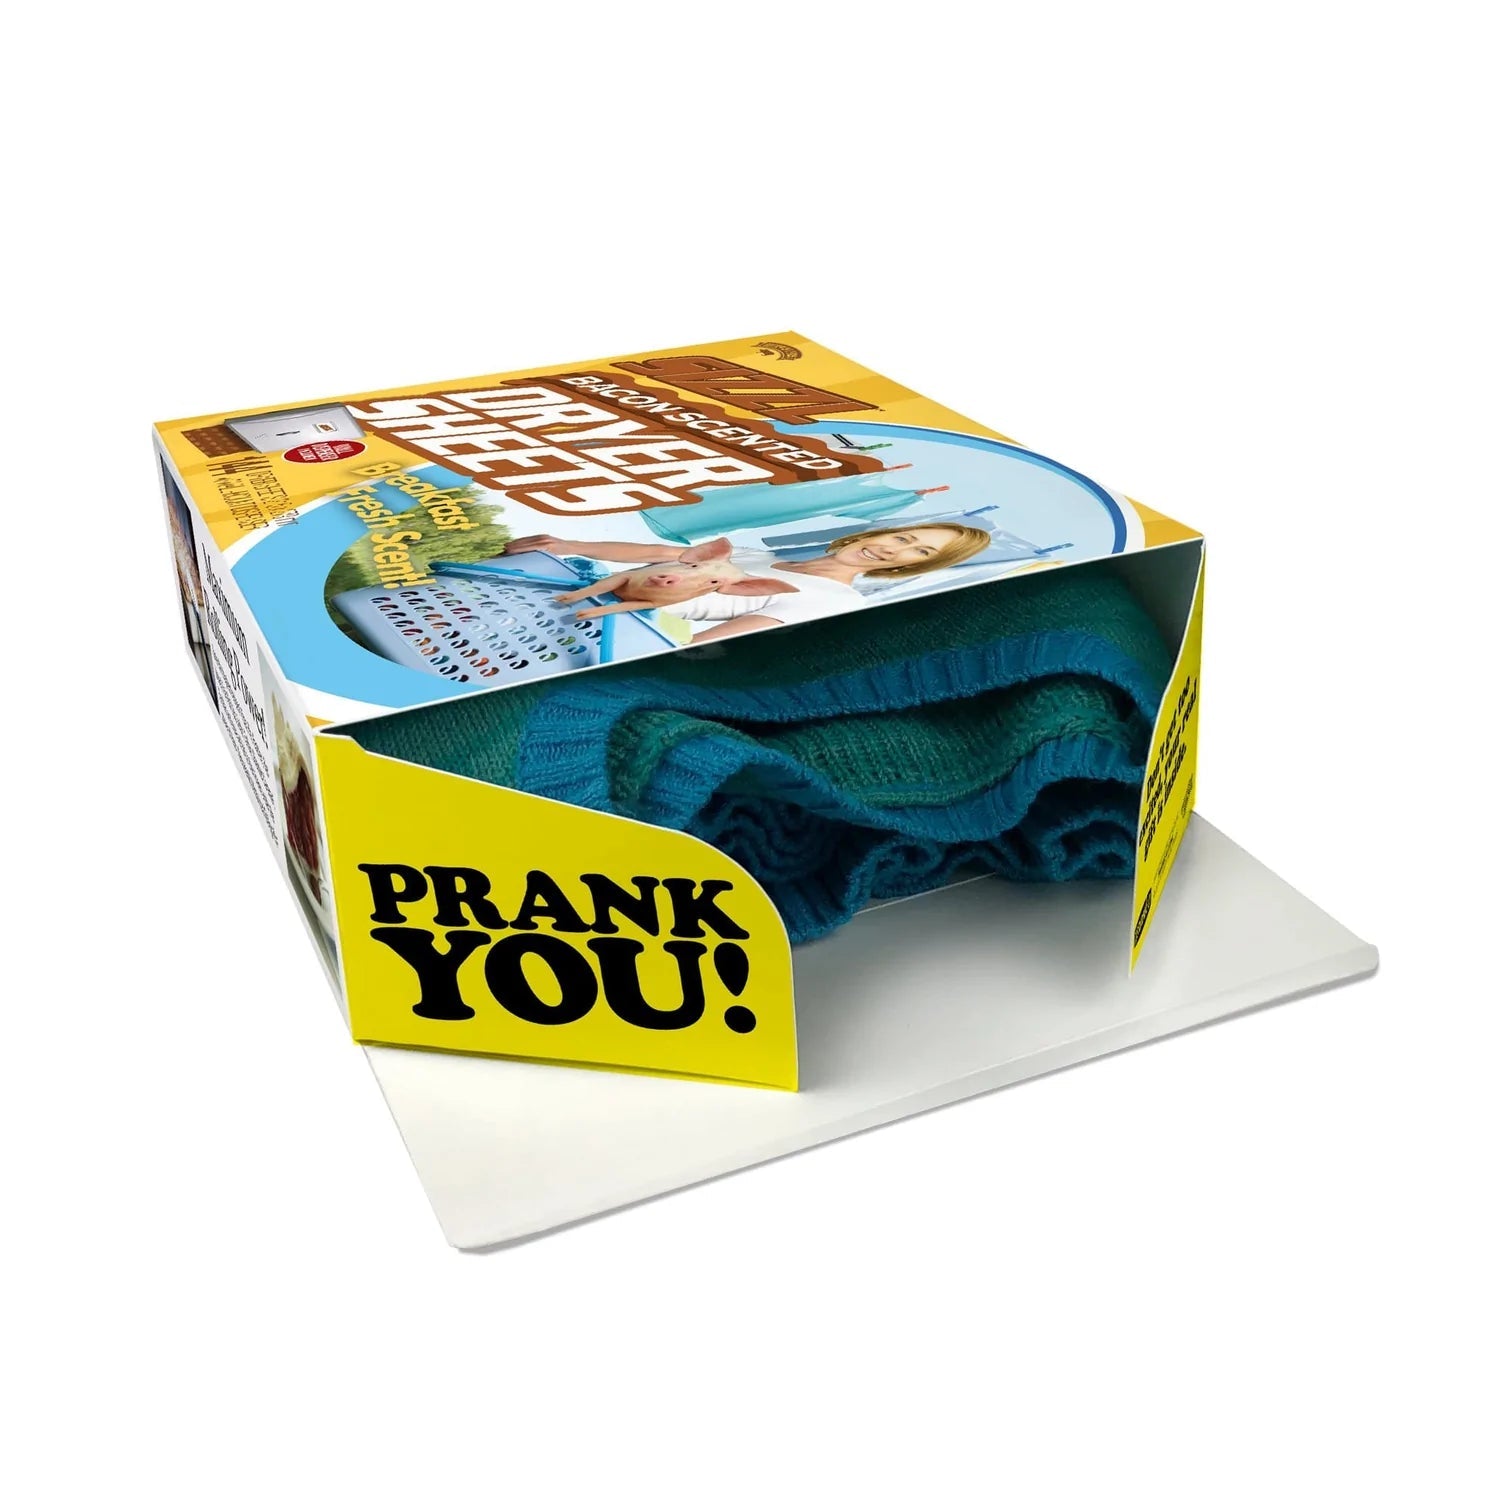 Bacon Scented Dryer Sheets - Prank Gift Box Pranks Anonymous send hilarious pranks and gag gifts to your friends or family.